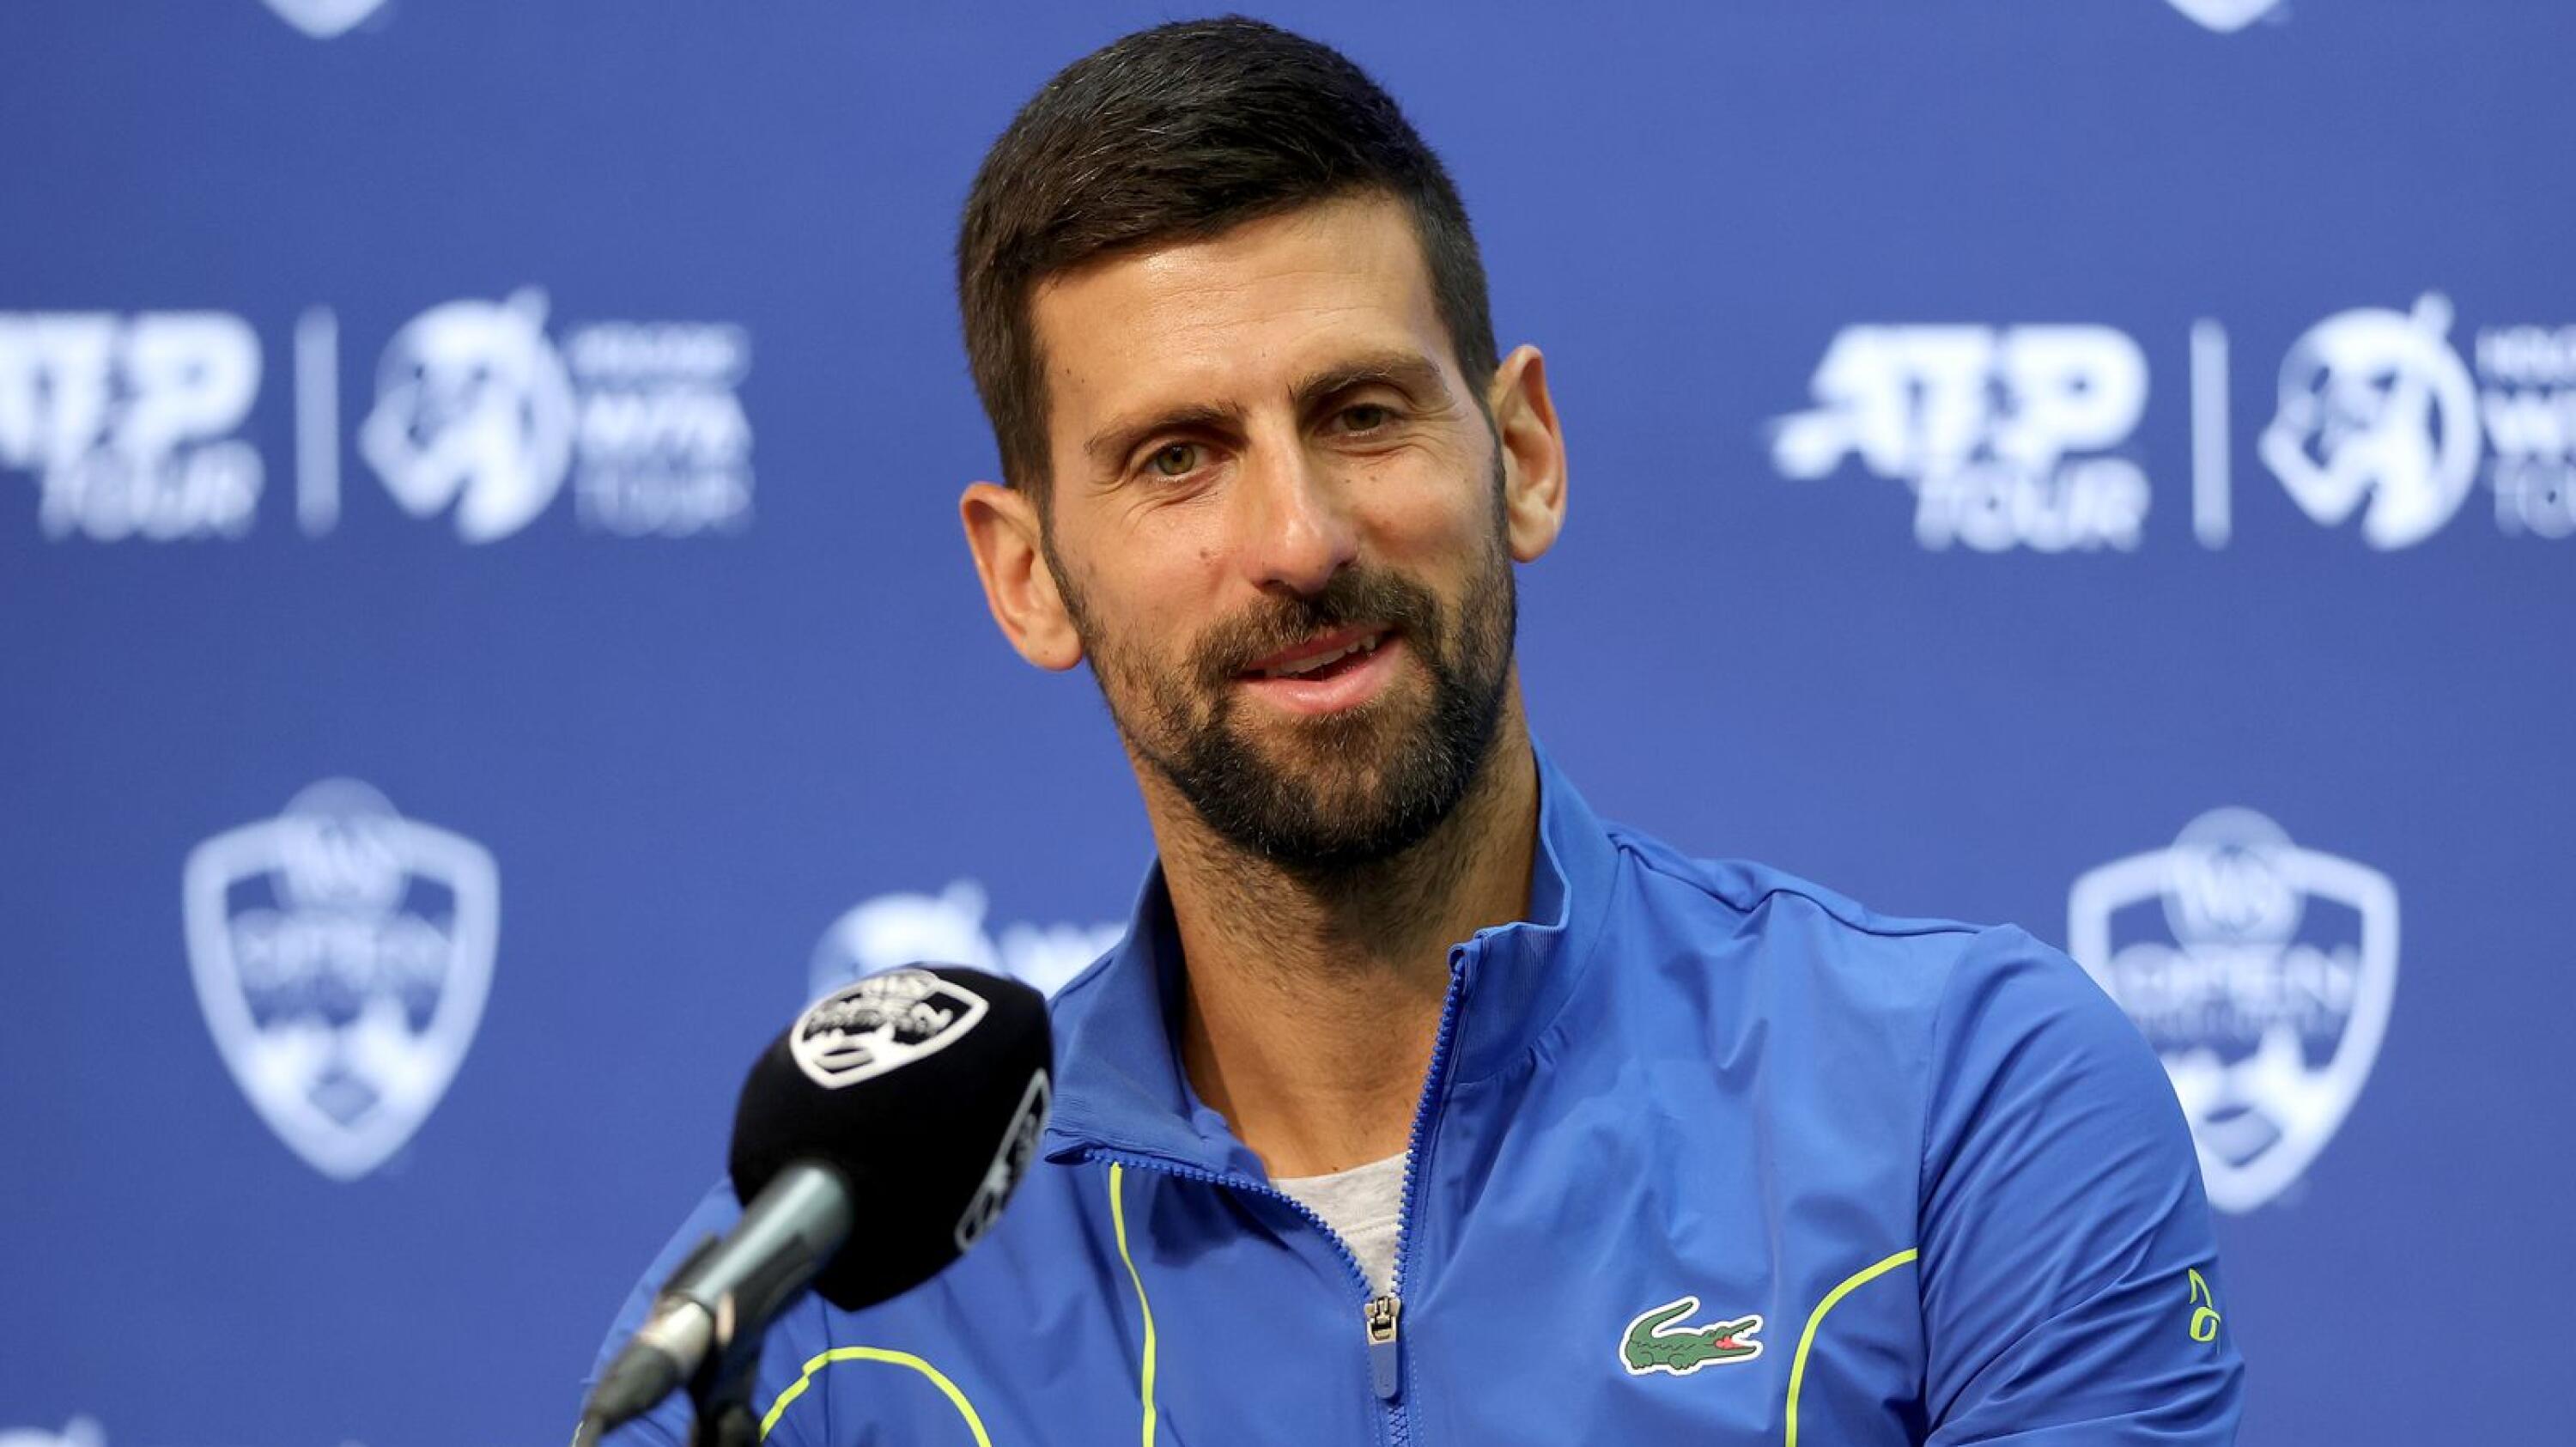 Novak Djokovic of Serbia fields questions from the media during the Western & Southern Open at Lindner Family Tennis Center on Monday